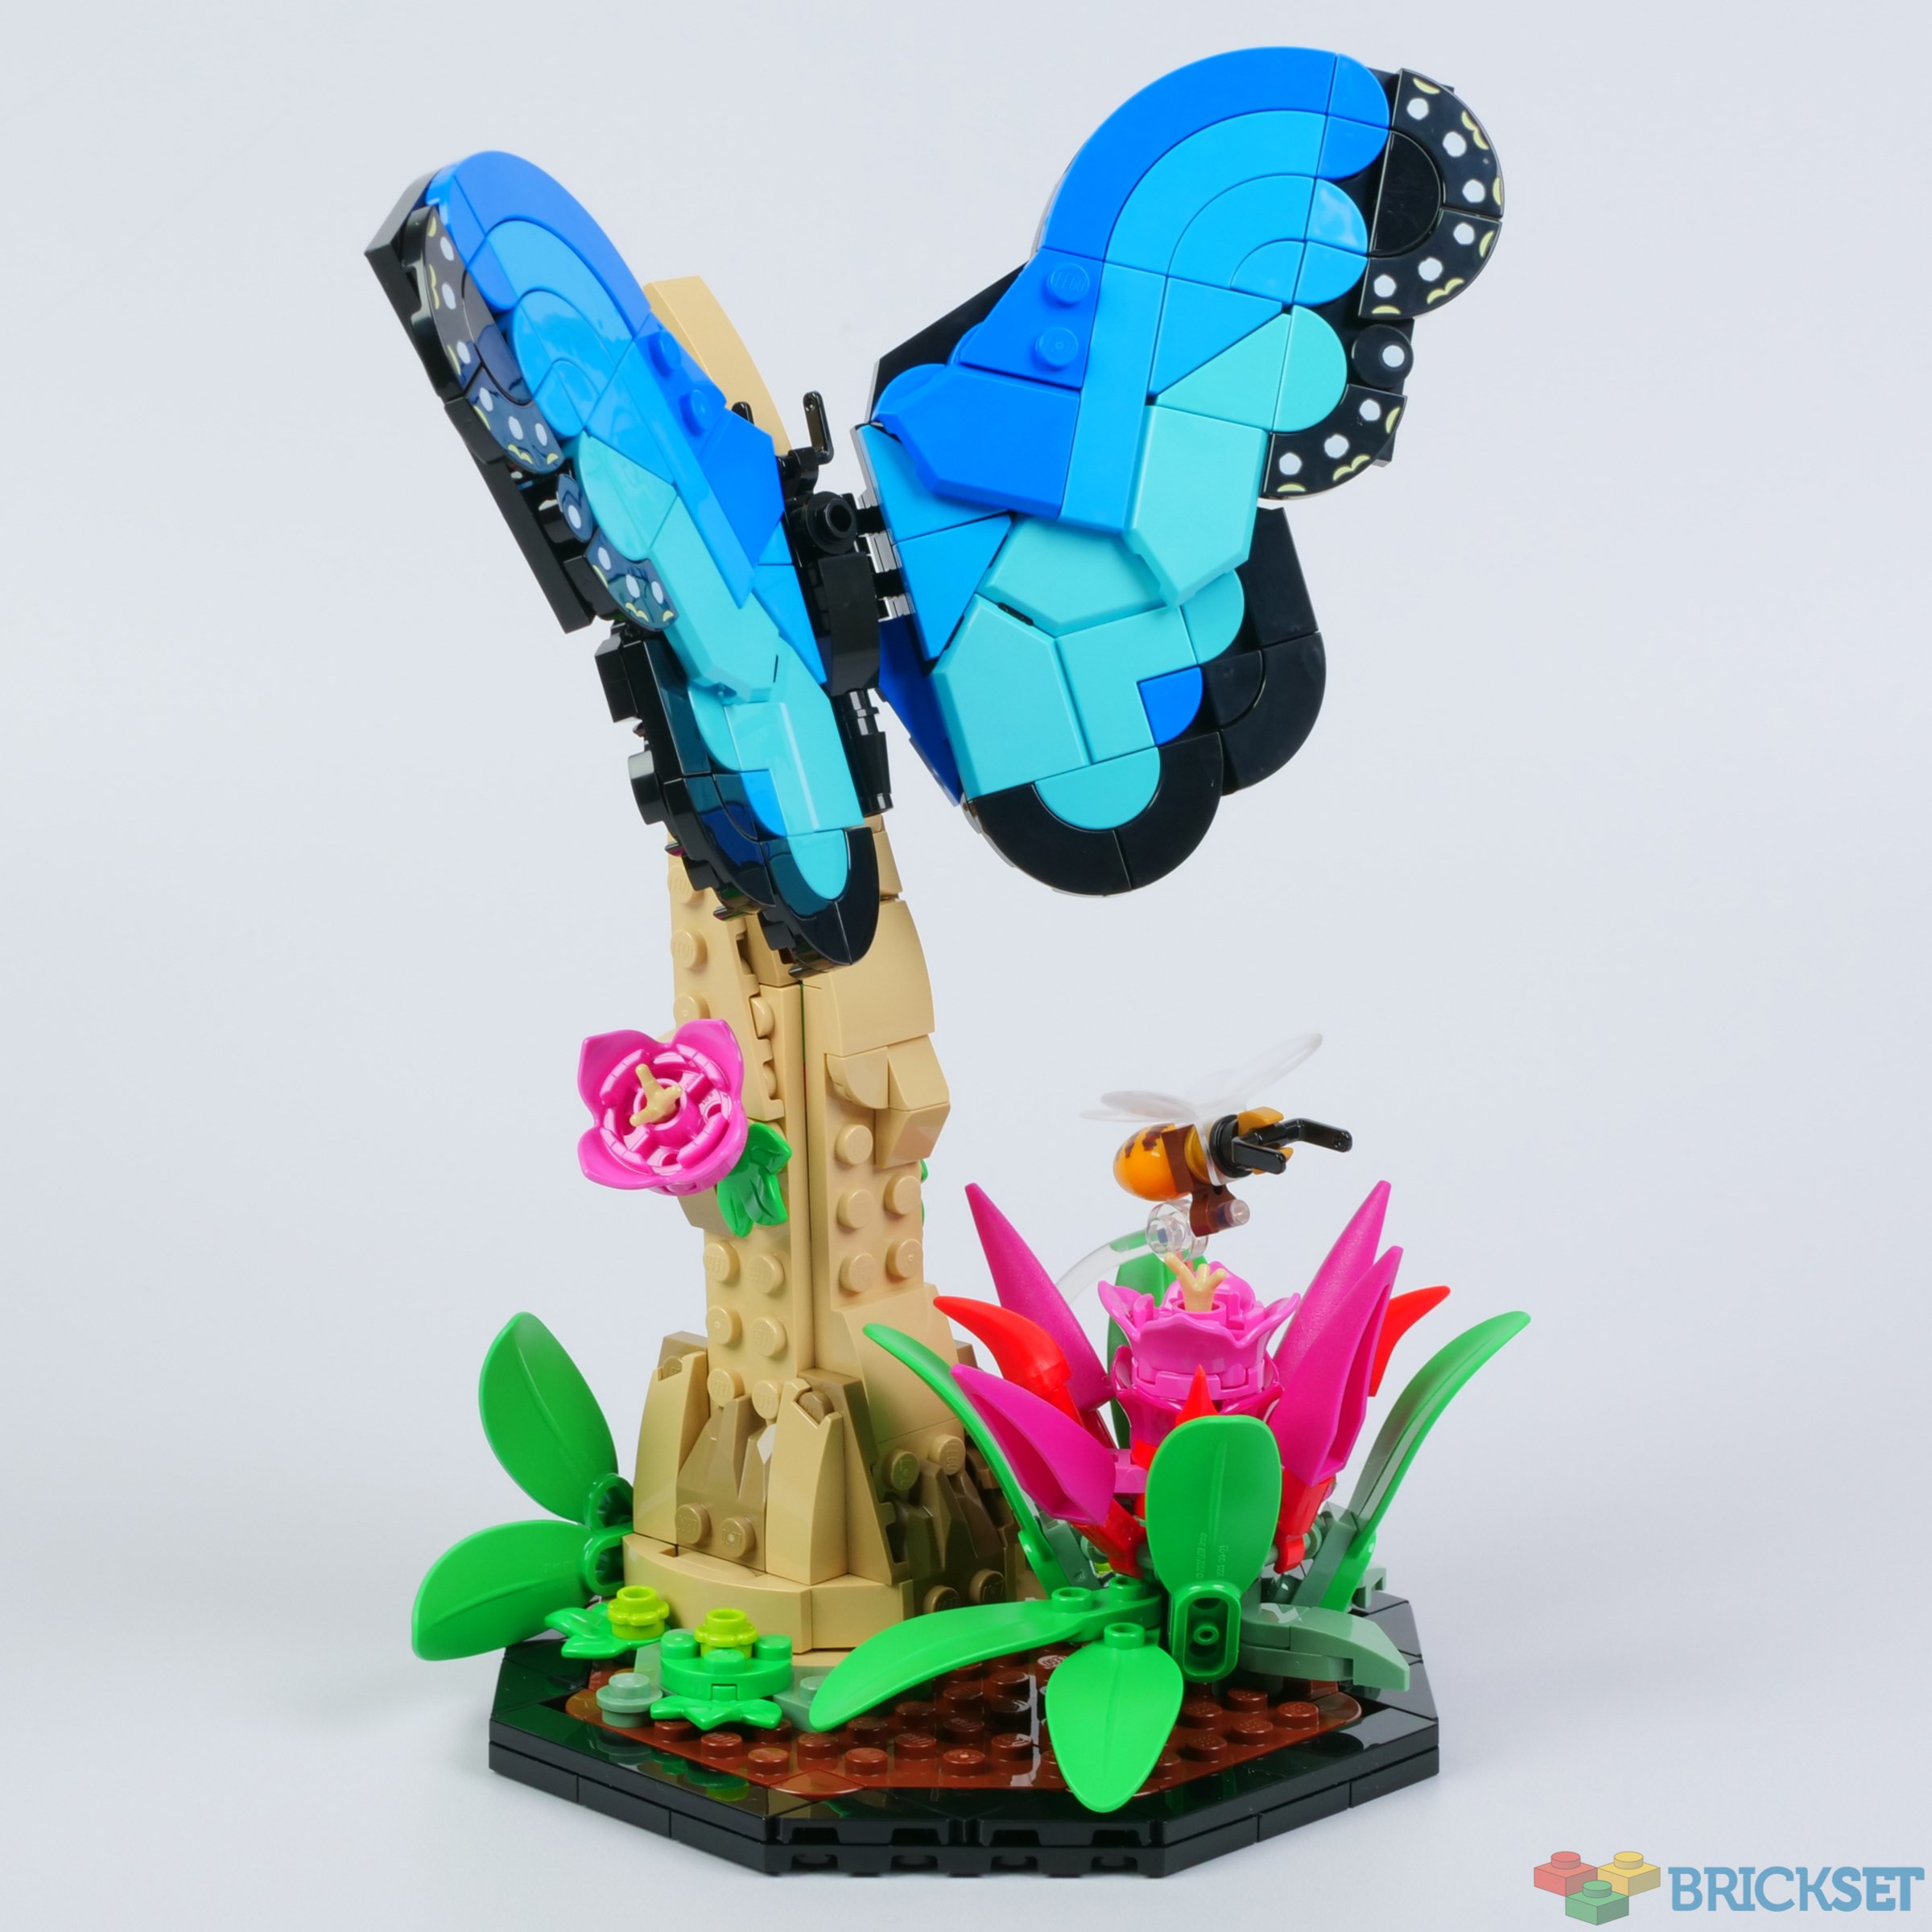  LEGO Ideas 21342 - The Insect Collection, Black : Toys